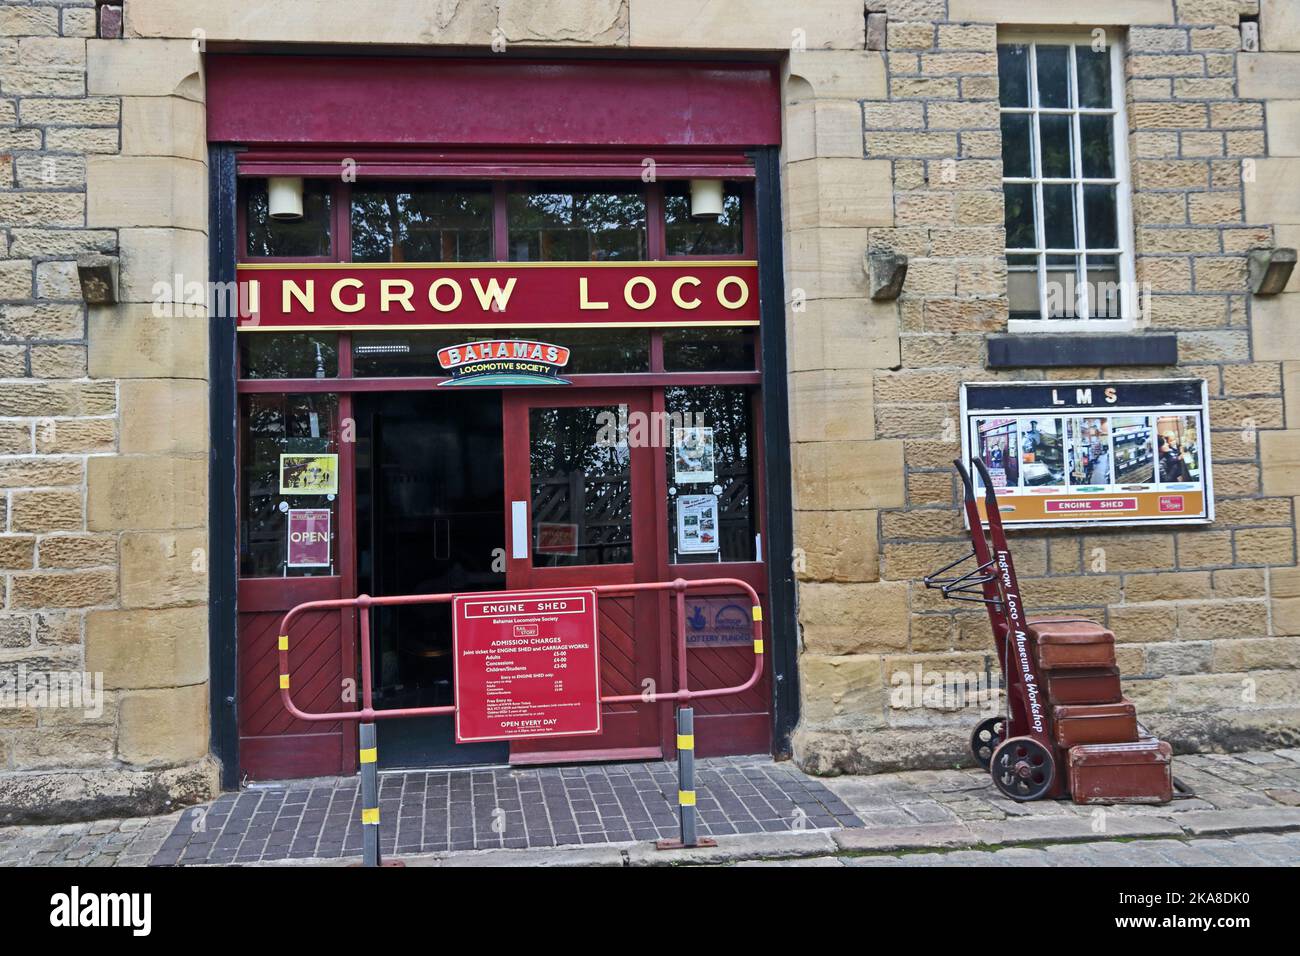 Entrance to Ingrow Loco Shed museum, Ingrow, on Keighley & Worth Valley Railway Stock Photo